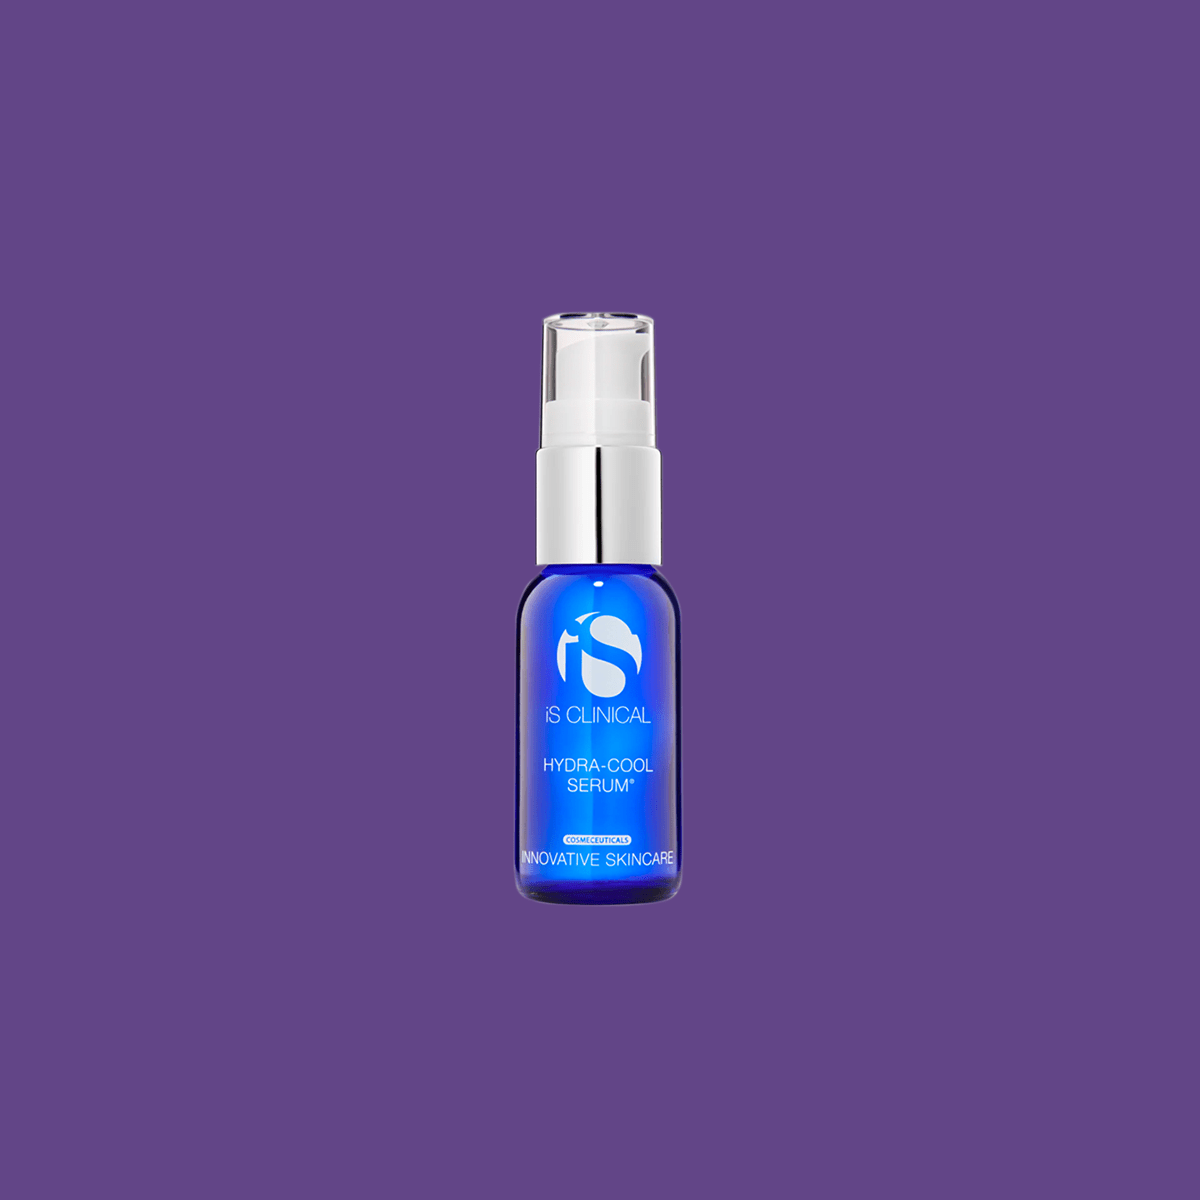 iS Clinical Hydra-Cool Serum for Hydrating and Clearing Skin (15mL or 0.5 oz) - Dryeye Rescue